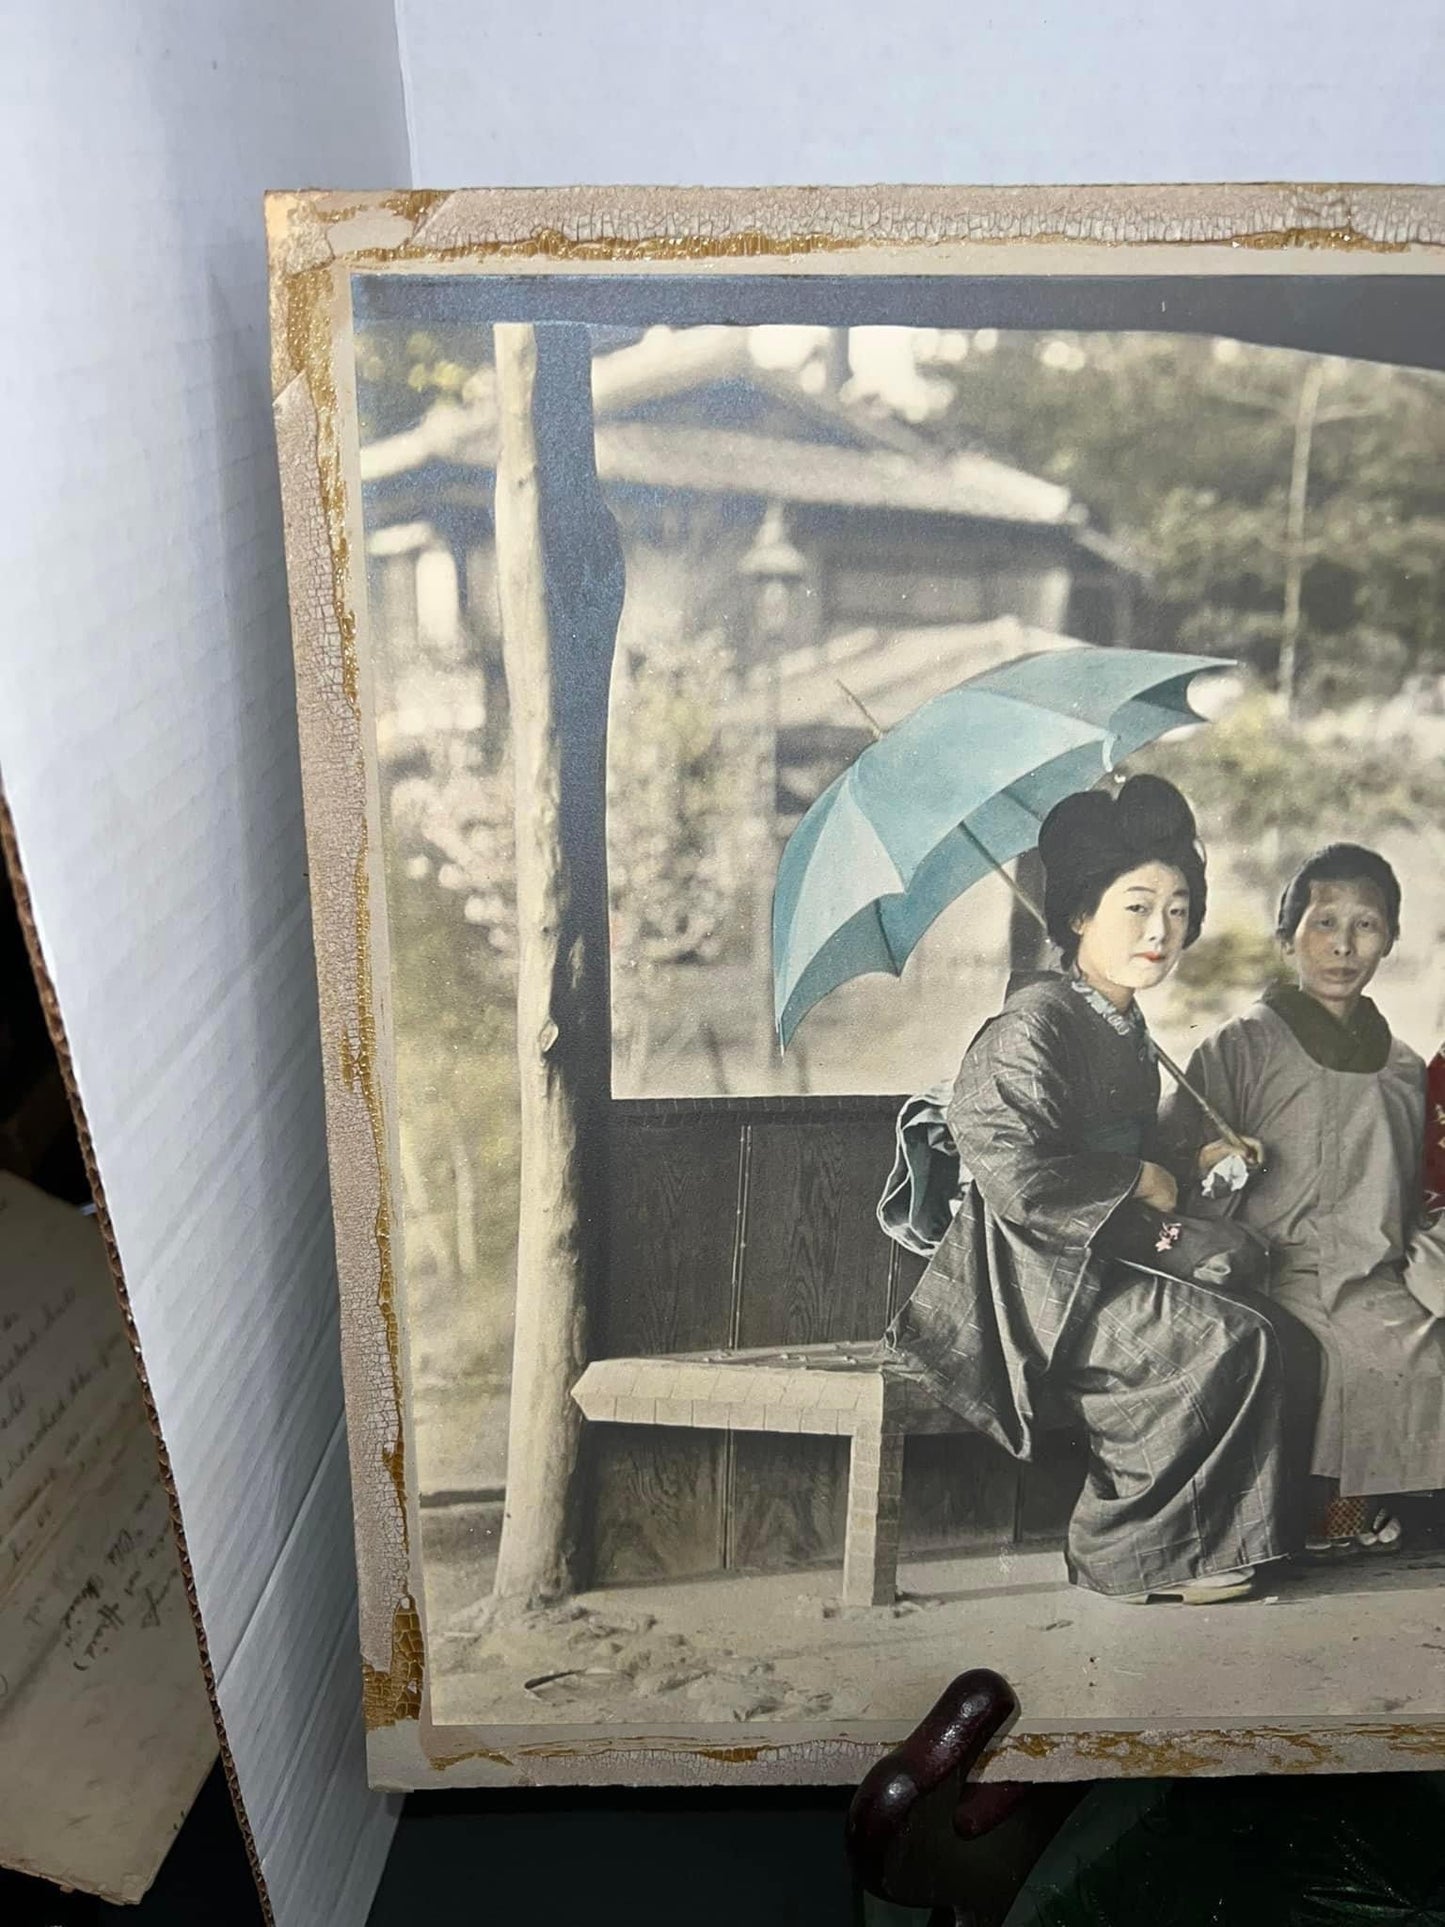 Antique turn of the century Large albumen mounted photo colored C 1910-1920Japanese women seated outdoors vintage photography